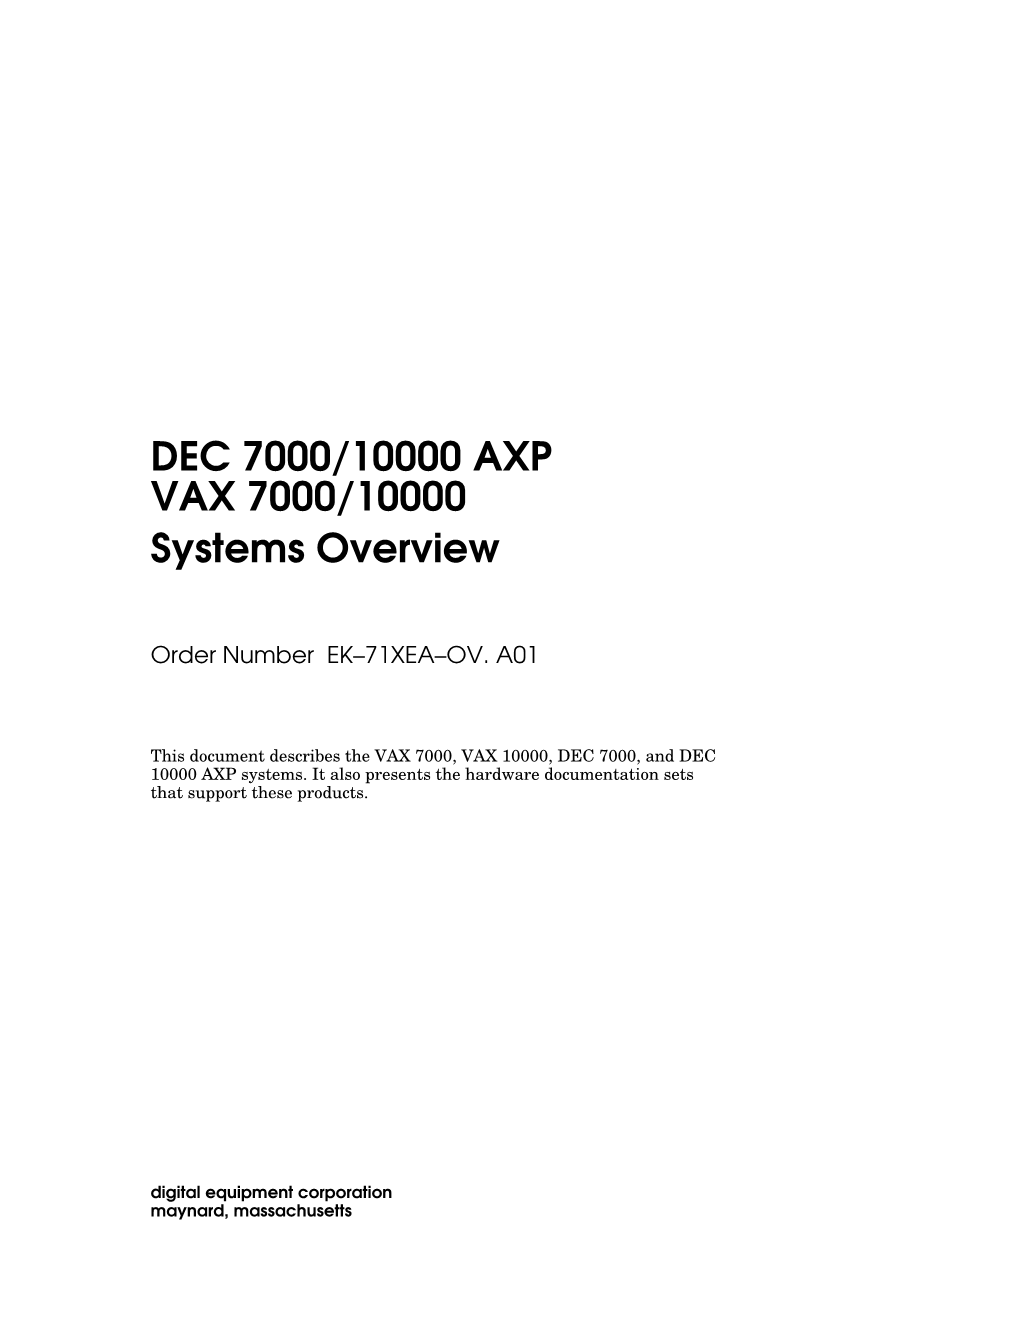 DEC 7000/10000 AXP VAX 7000/10000 Systems Overview